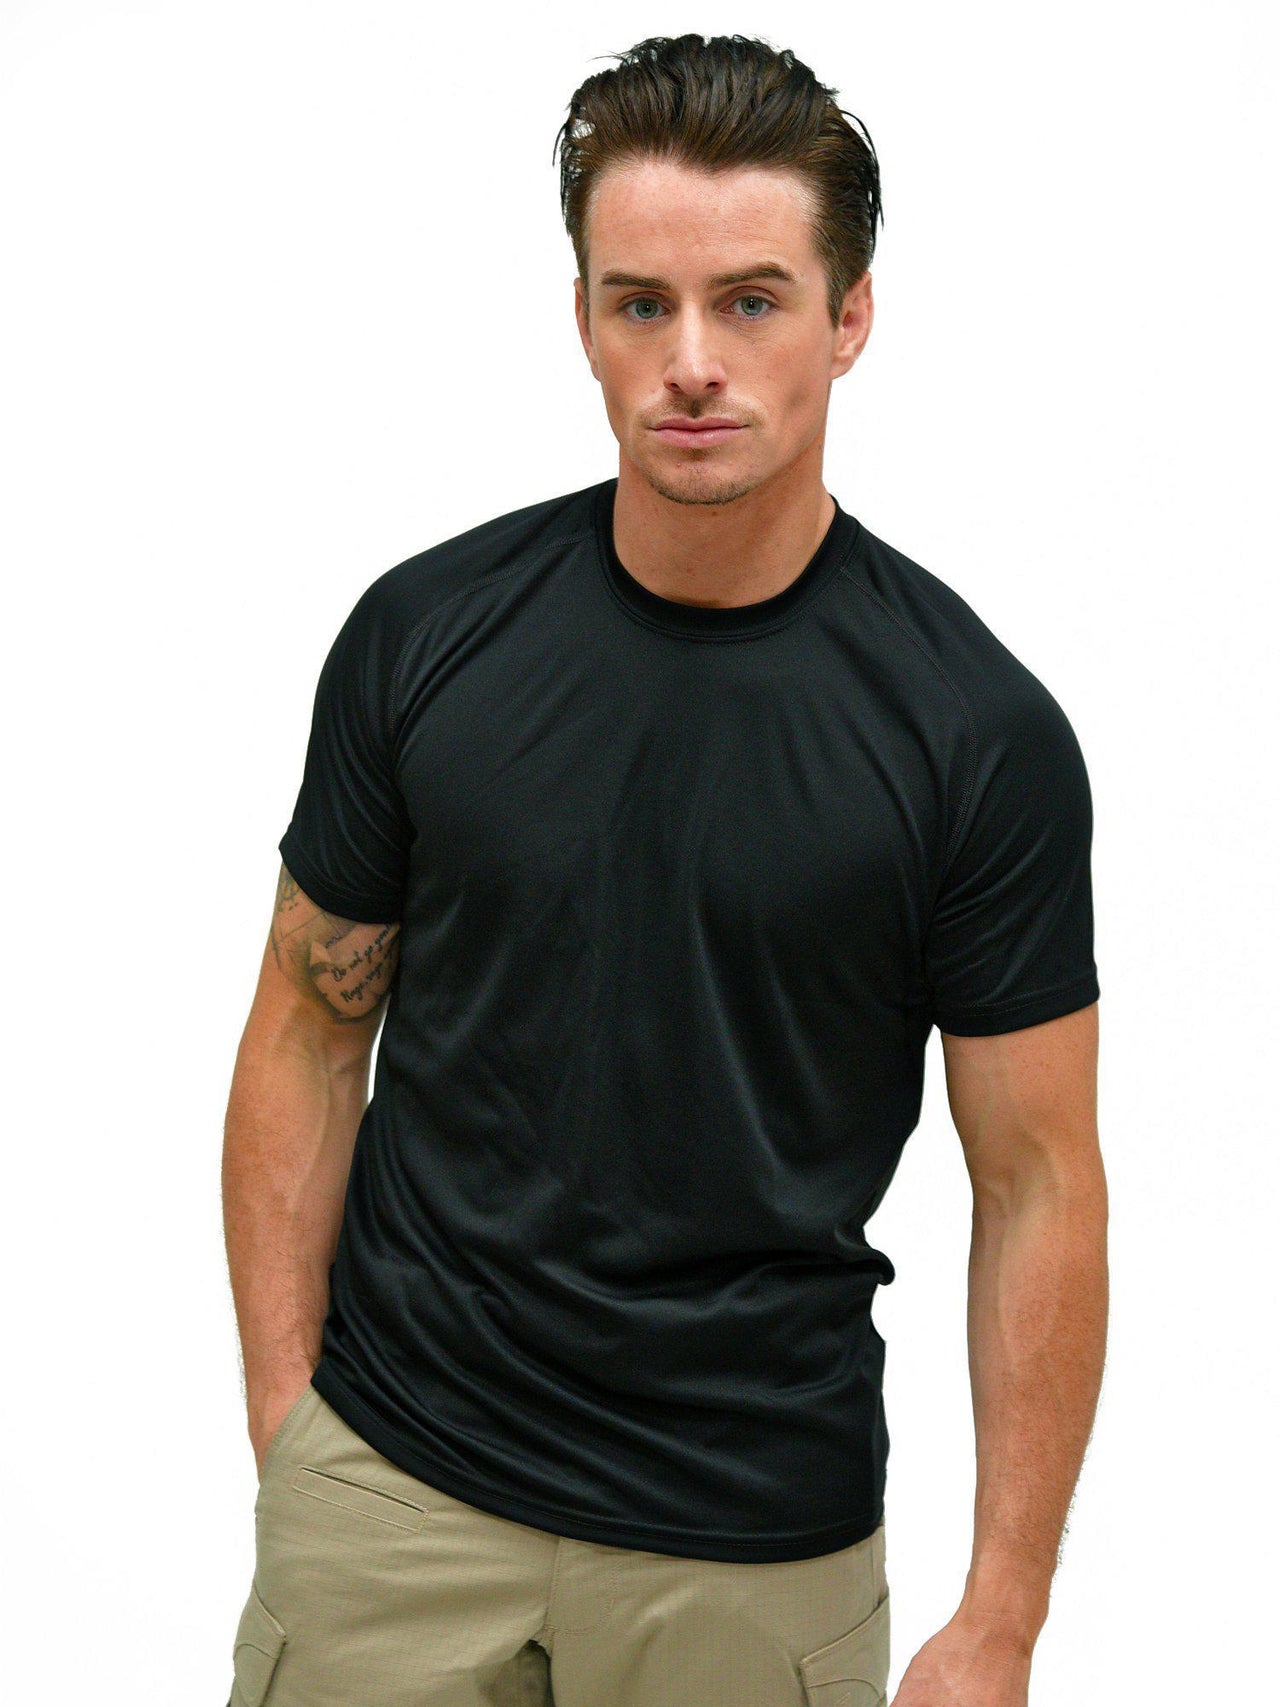 SALE - 5.11 Tactical Loose Fit Crew Short Sleeve - Midnight Navy - TacSource